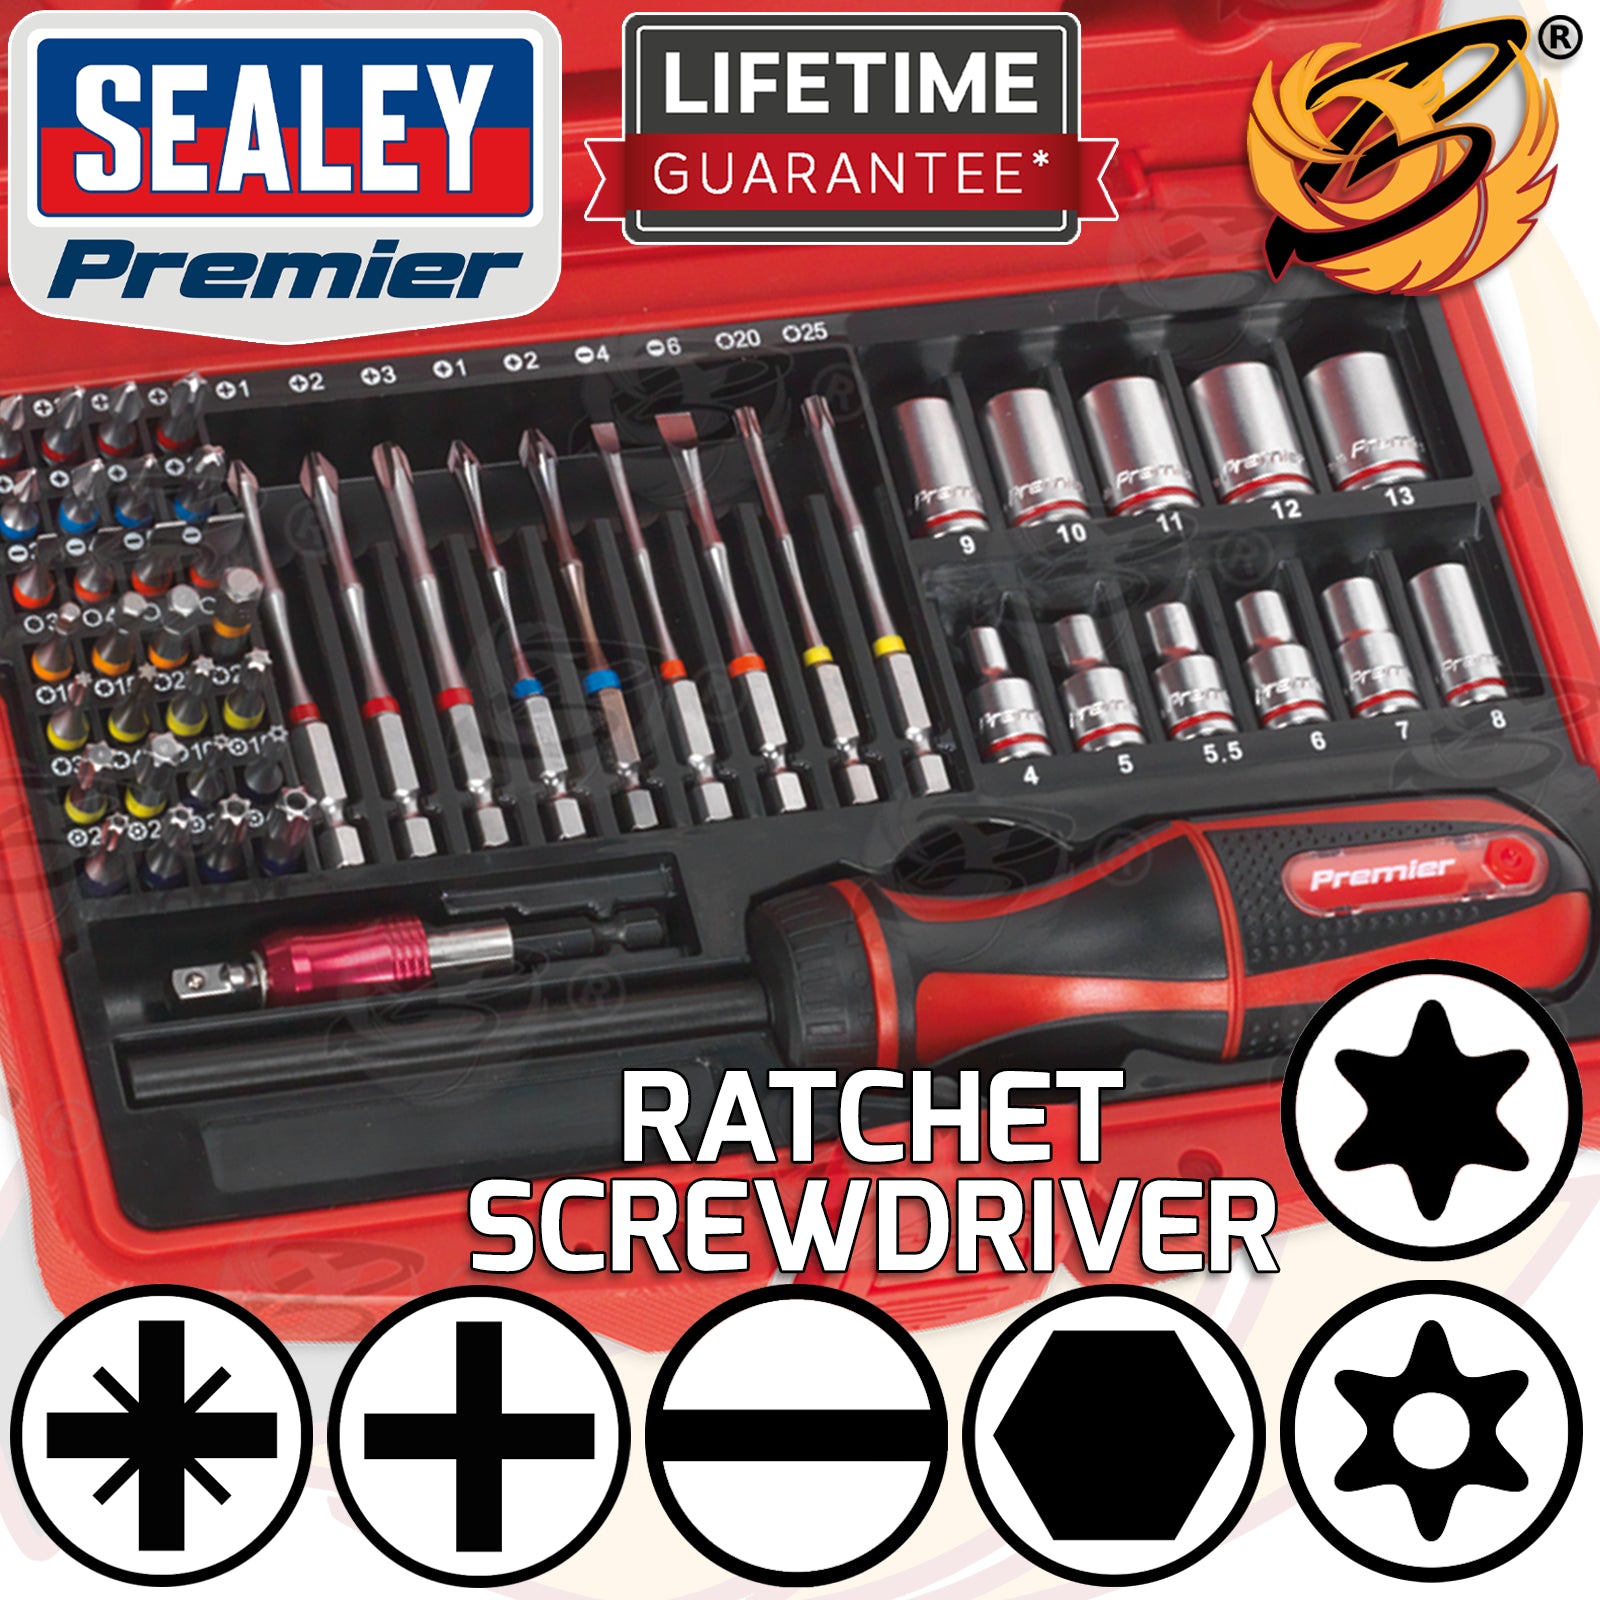 SEALEY 51PCS FINE TOOTH RATCHET SCREWDRIVER & ACCESSORIES